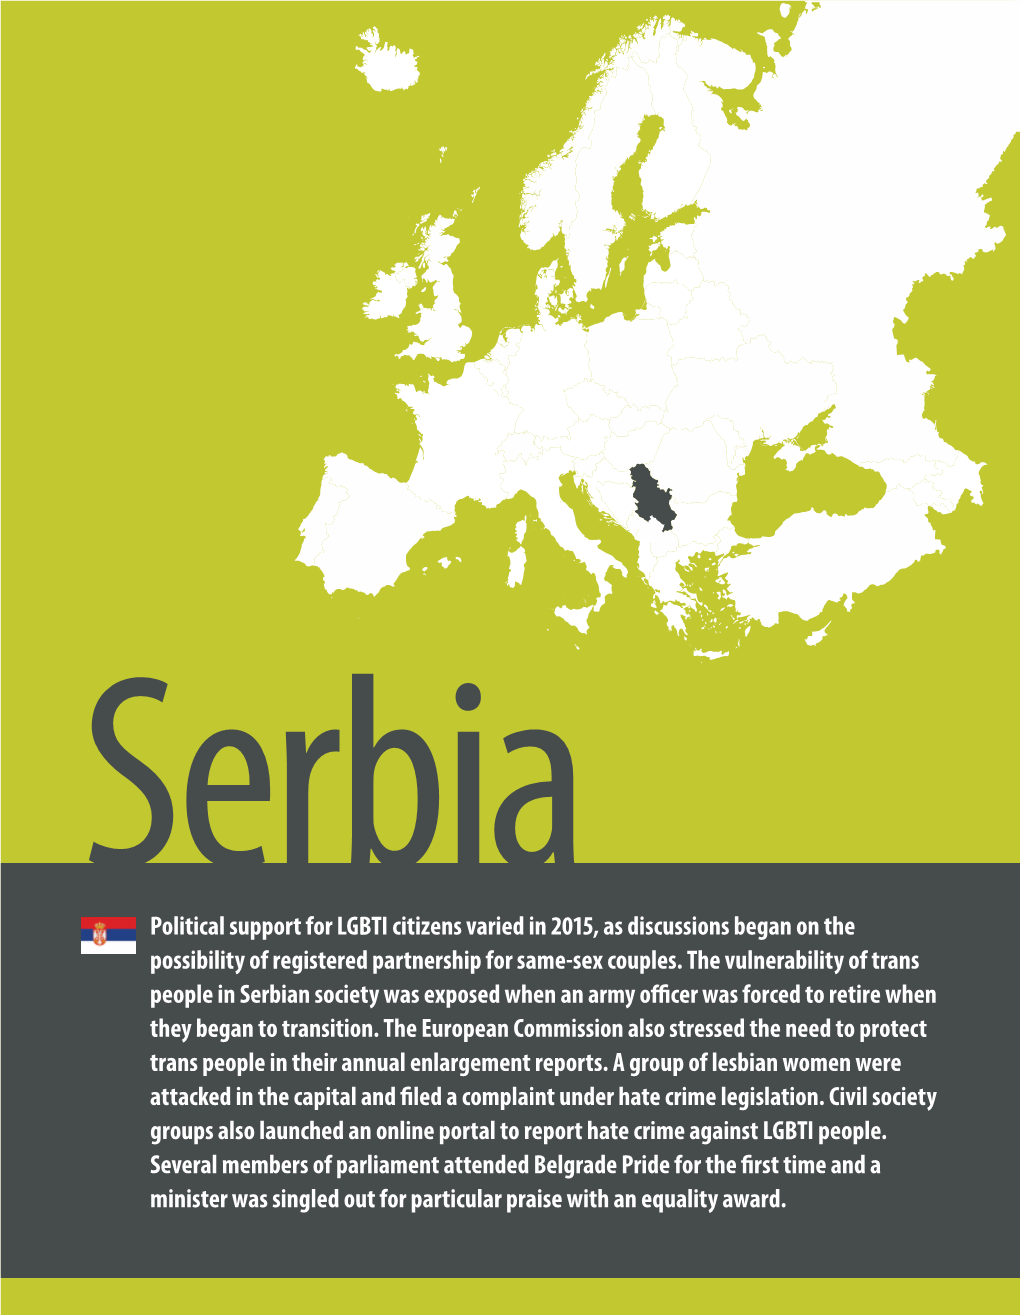 Serbia Political Support for LGBTI Citizens Varied in 2015, As Discussions Began on the Possibility of Registered Partnership for Same-Sex Couples